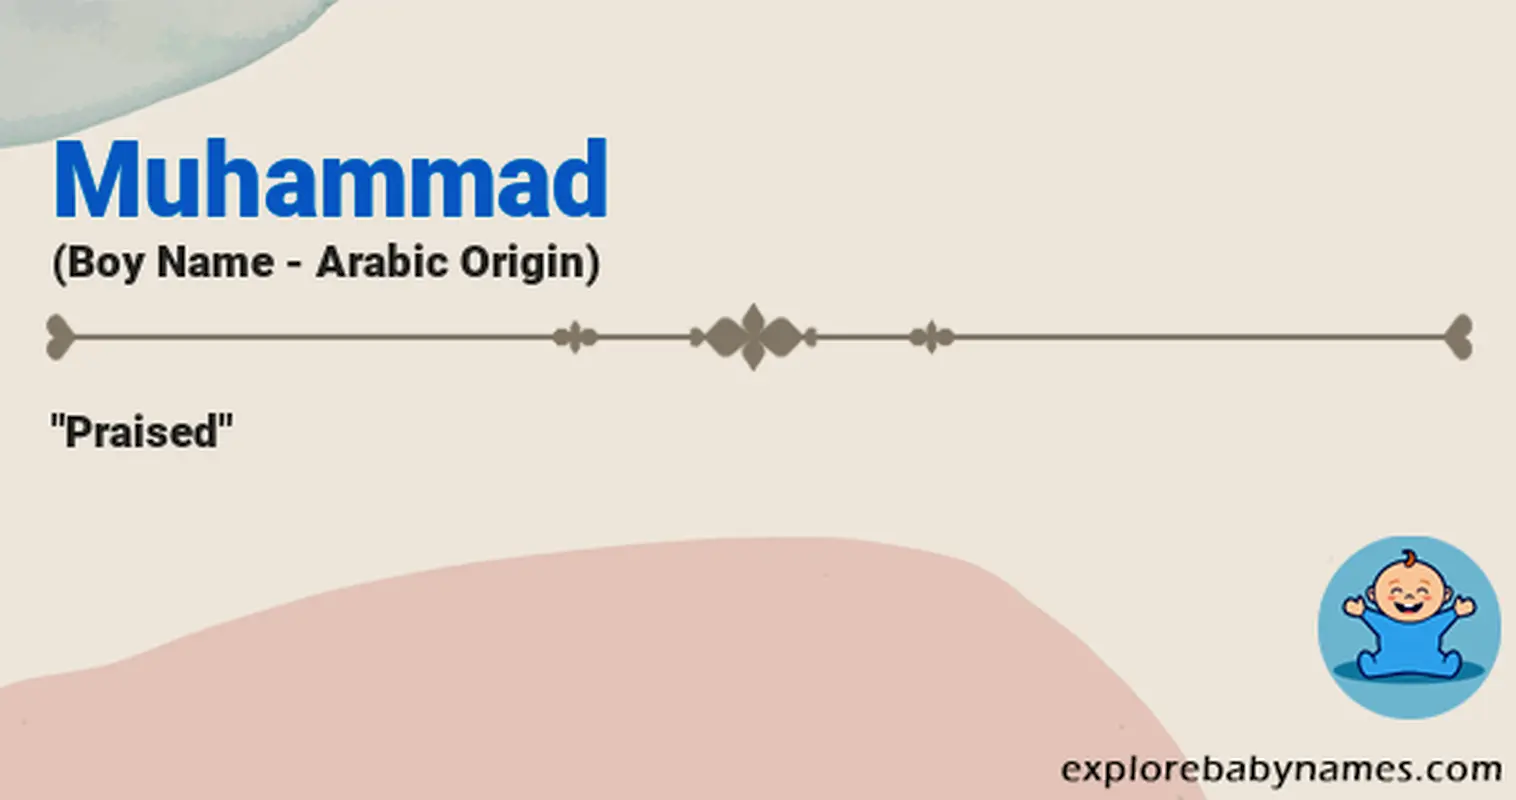 Meaning of Muhammad